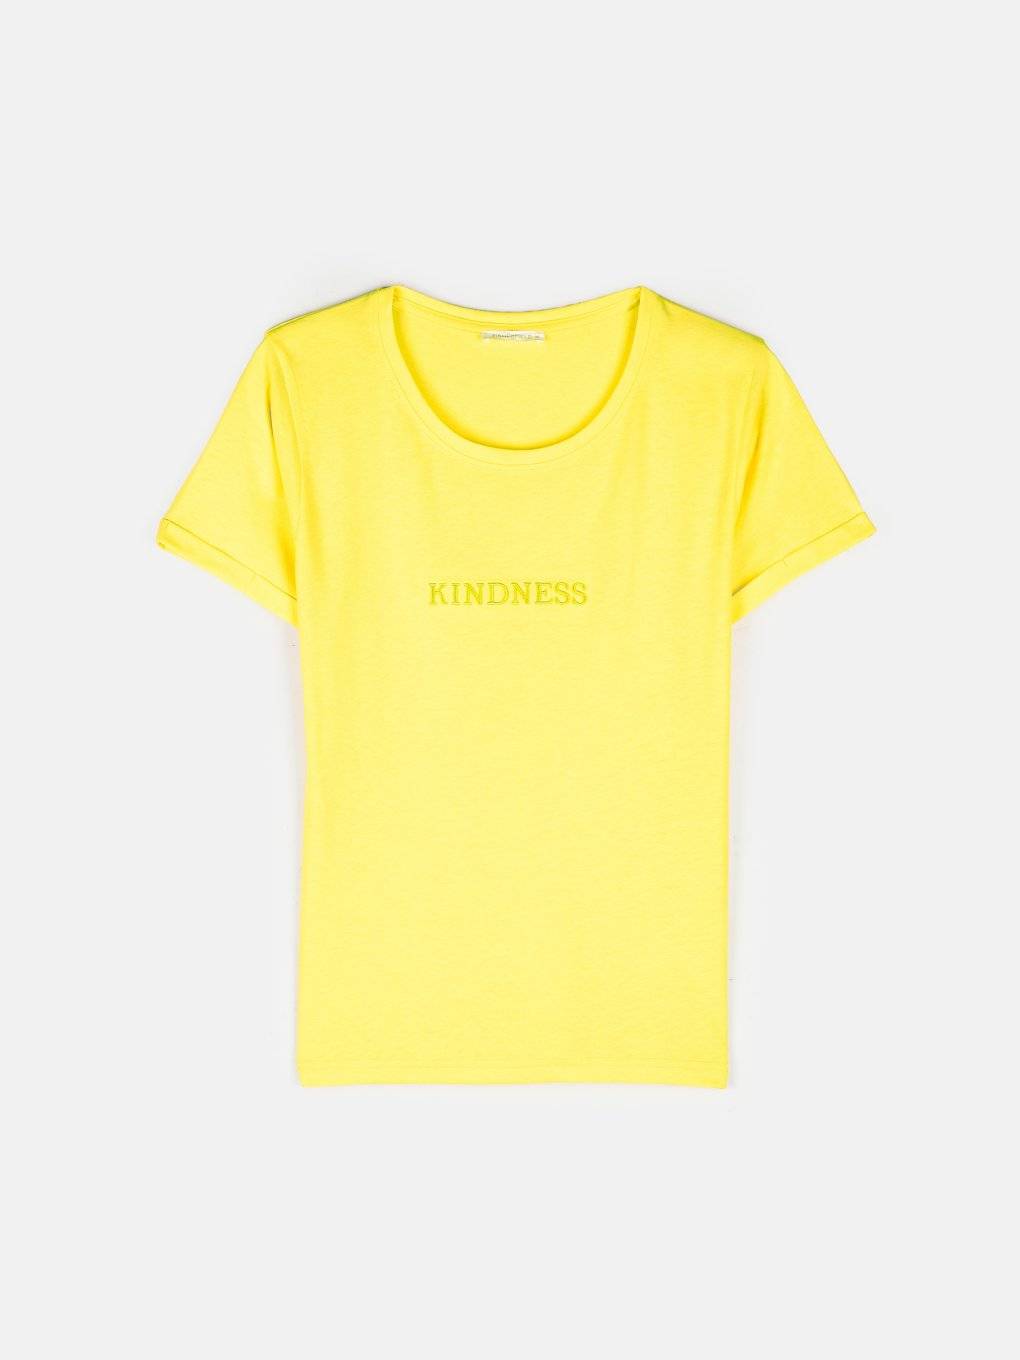 Neon t-shirt with embroidery